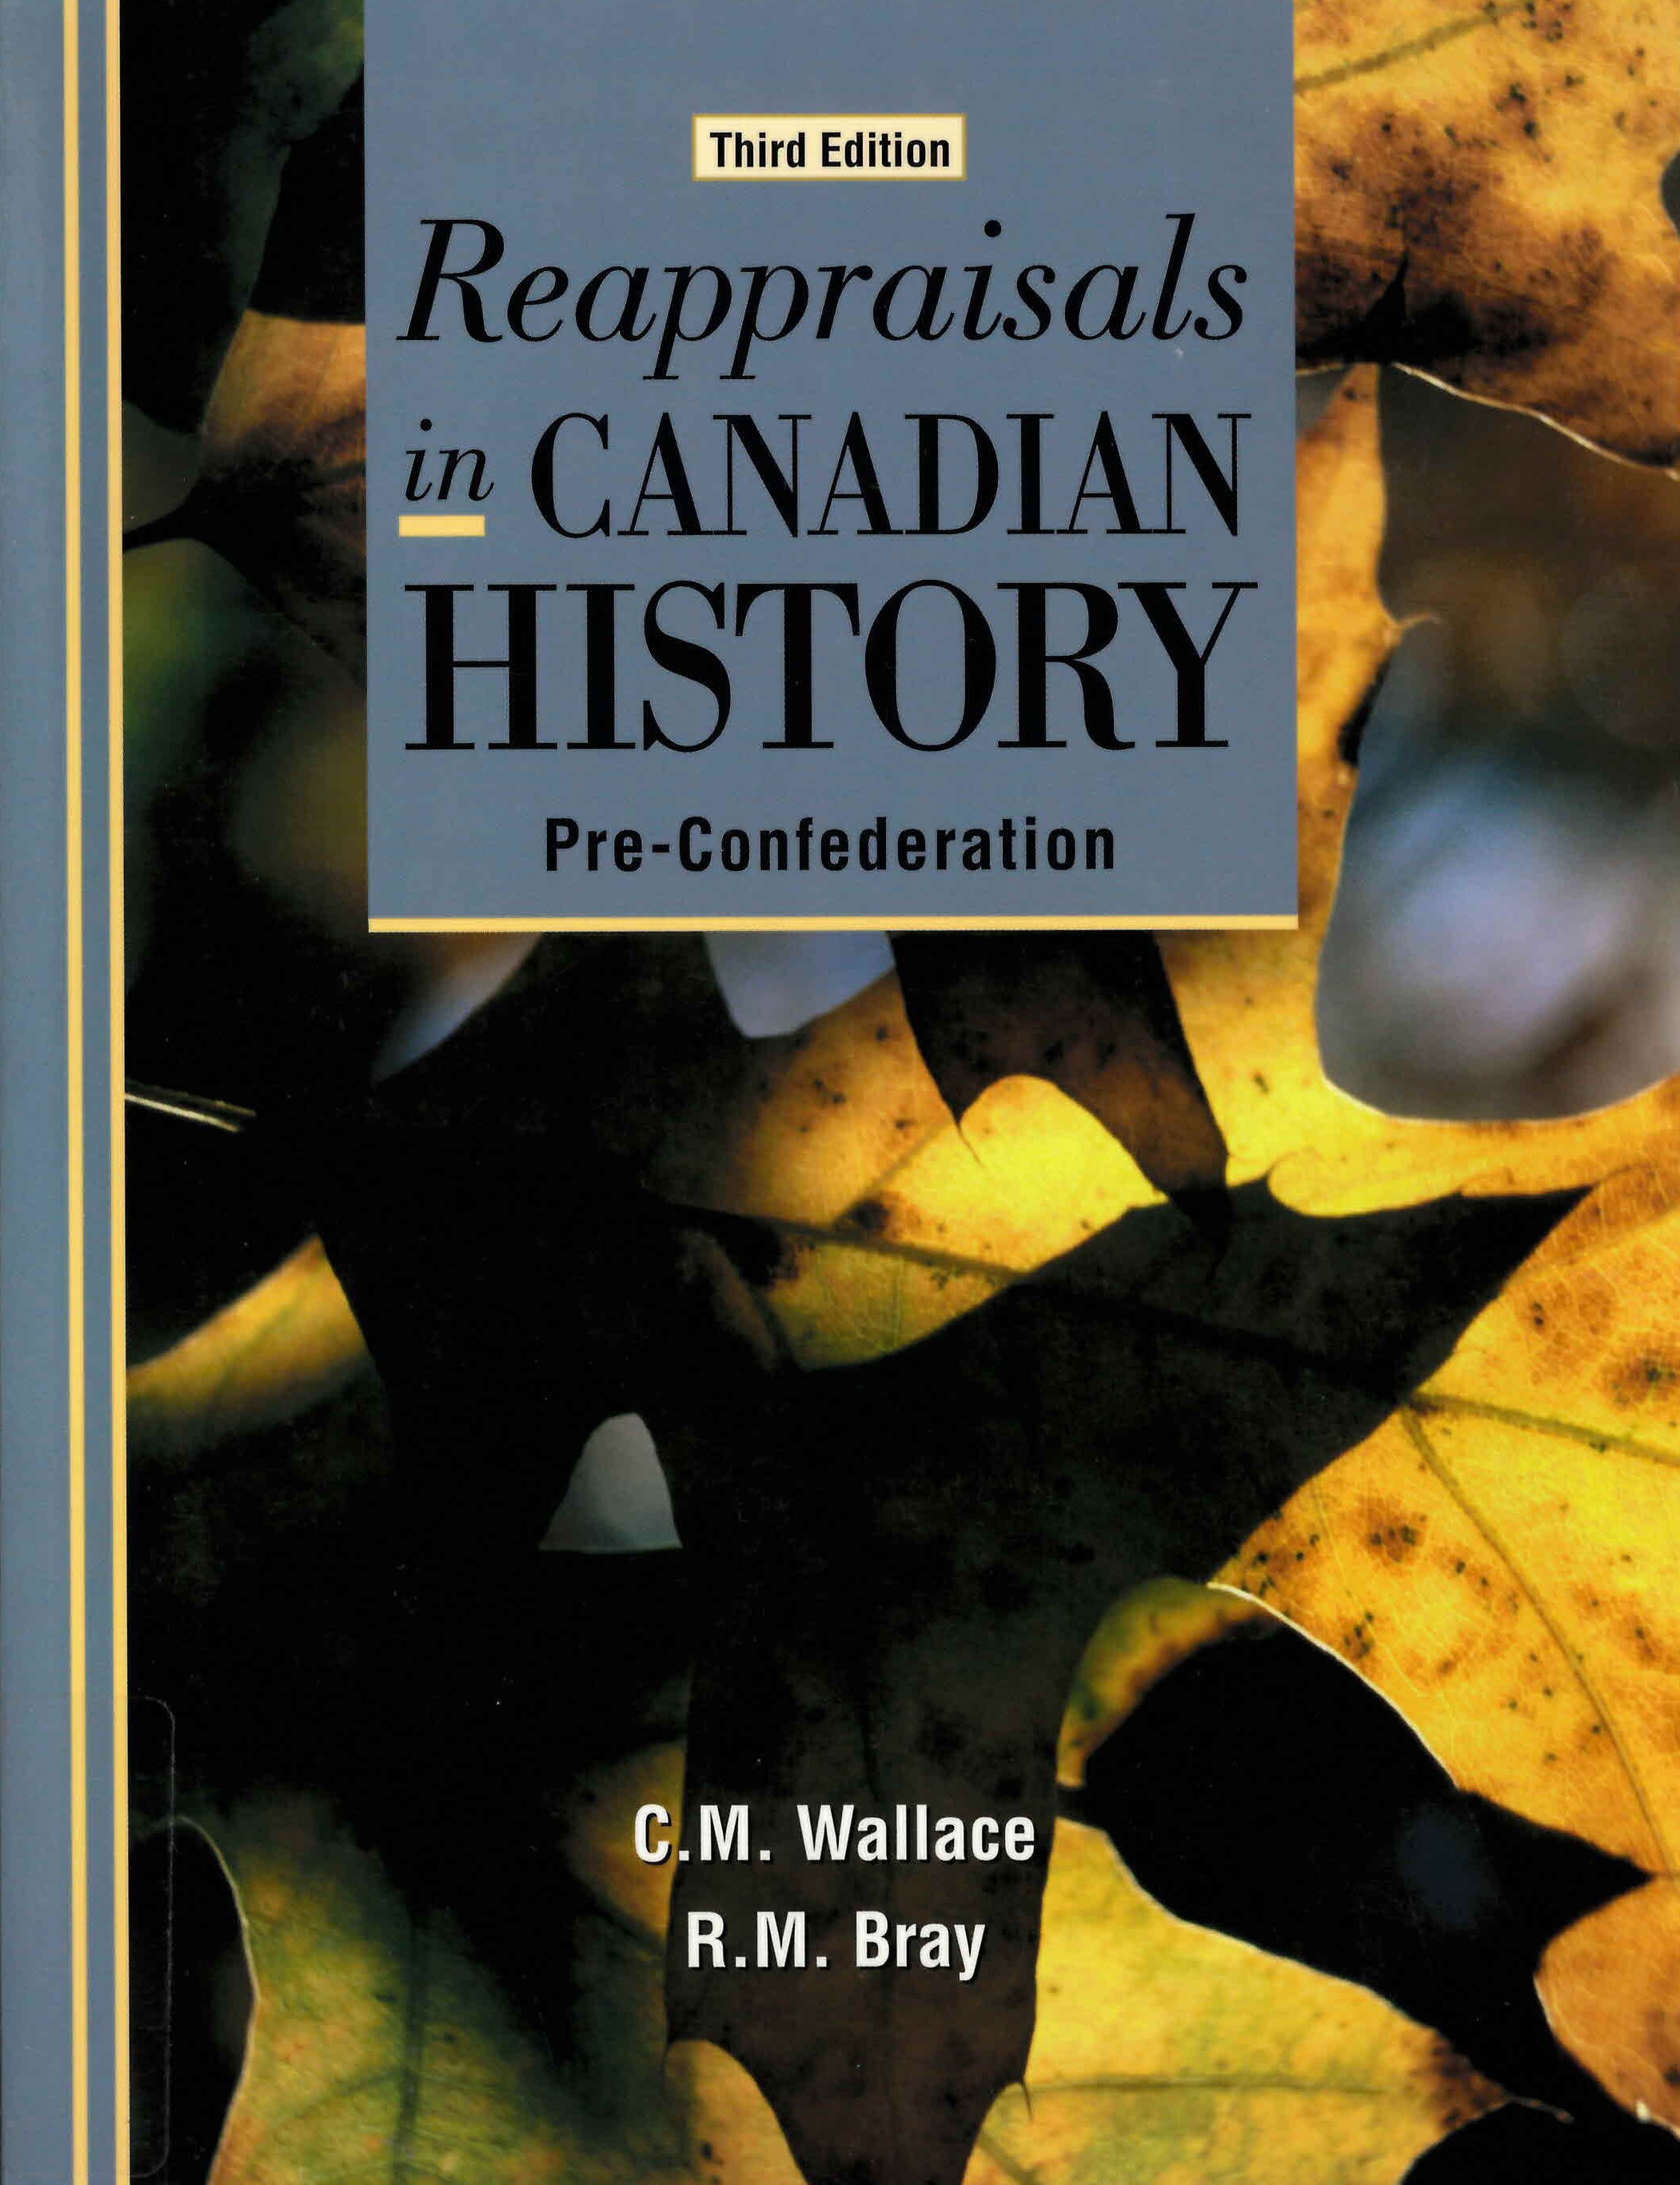 Reappraisals in Canadian history, pre-confederation